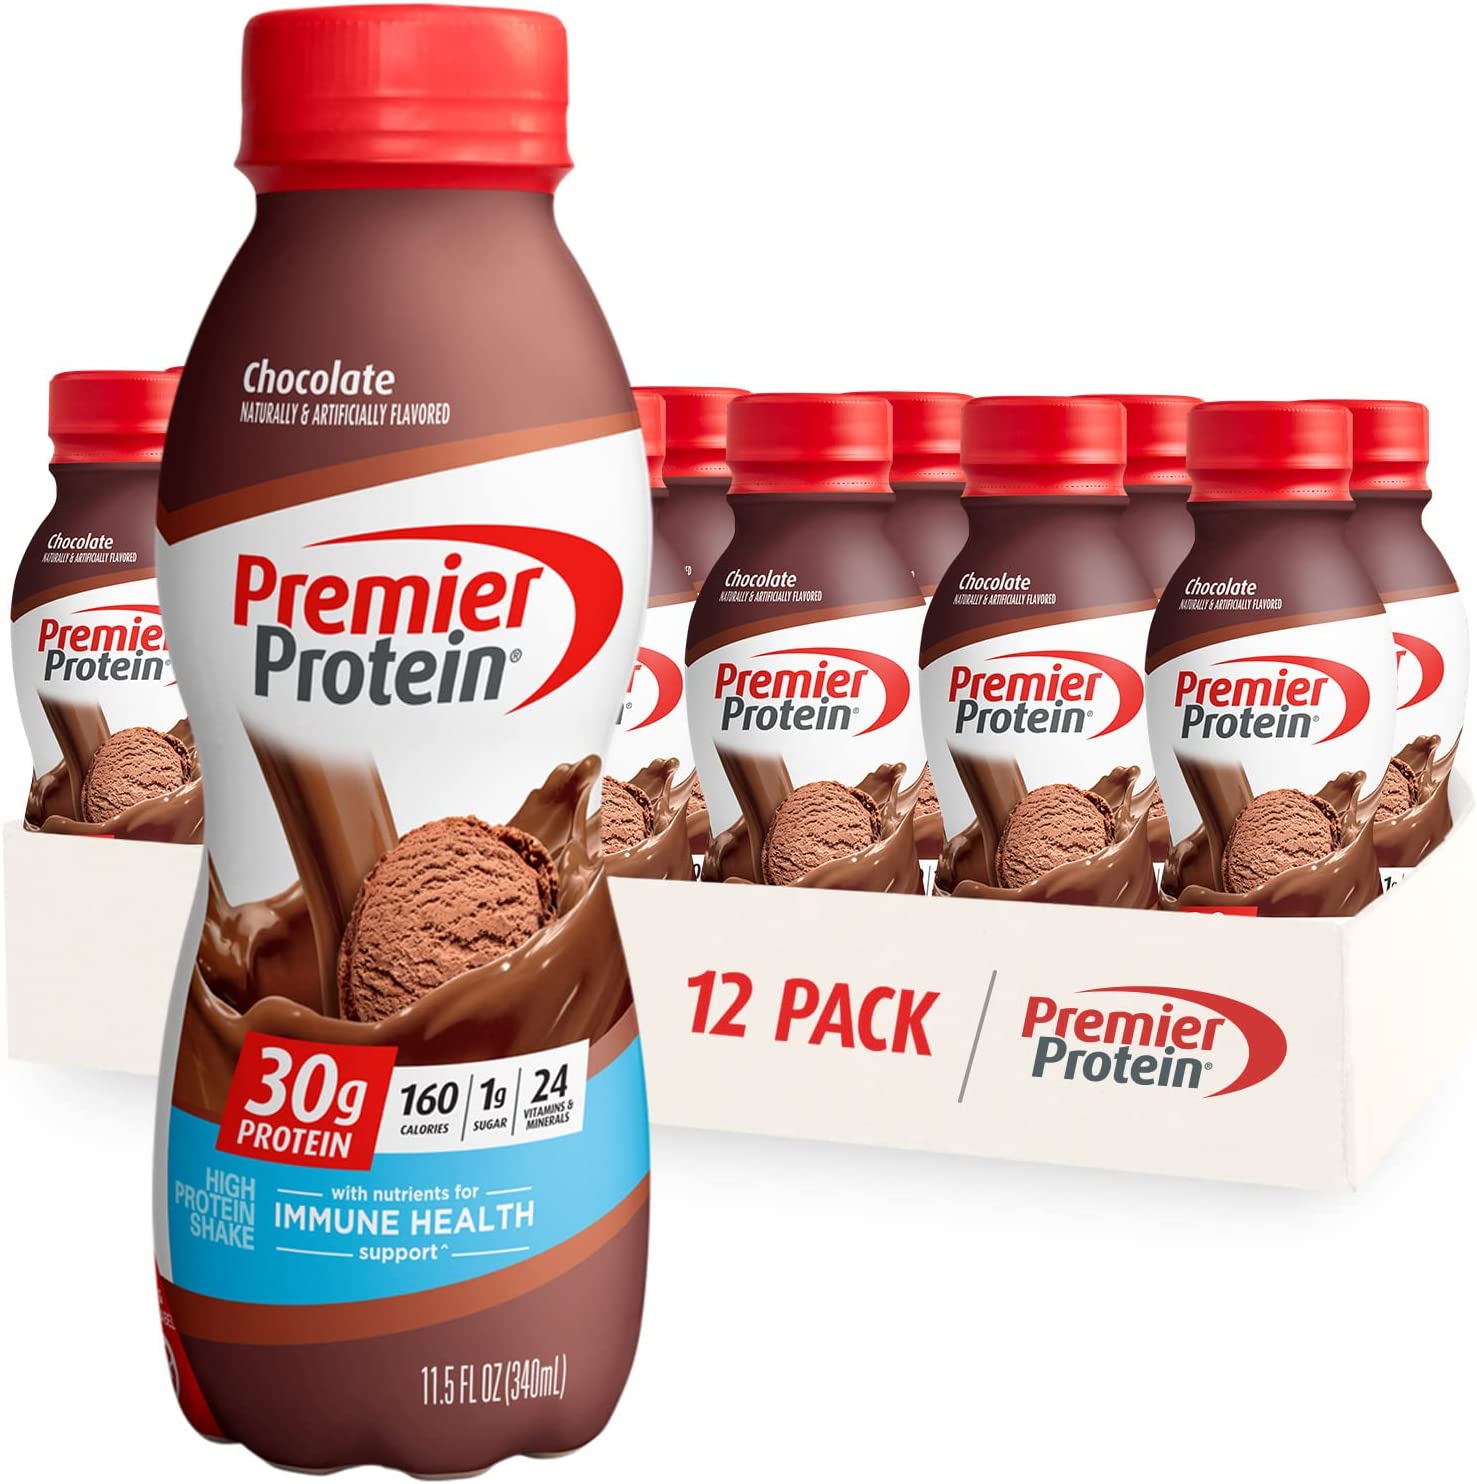 12-Pack 11.5-Oz Premier Protein Shake (Various Flavors) From $17.50 & More w/ Subscribe & Save